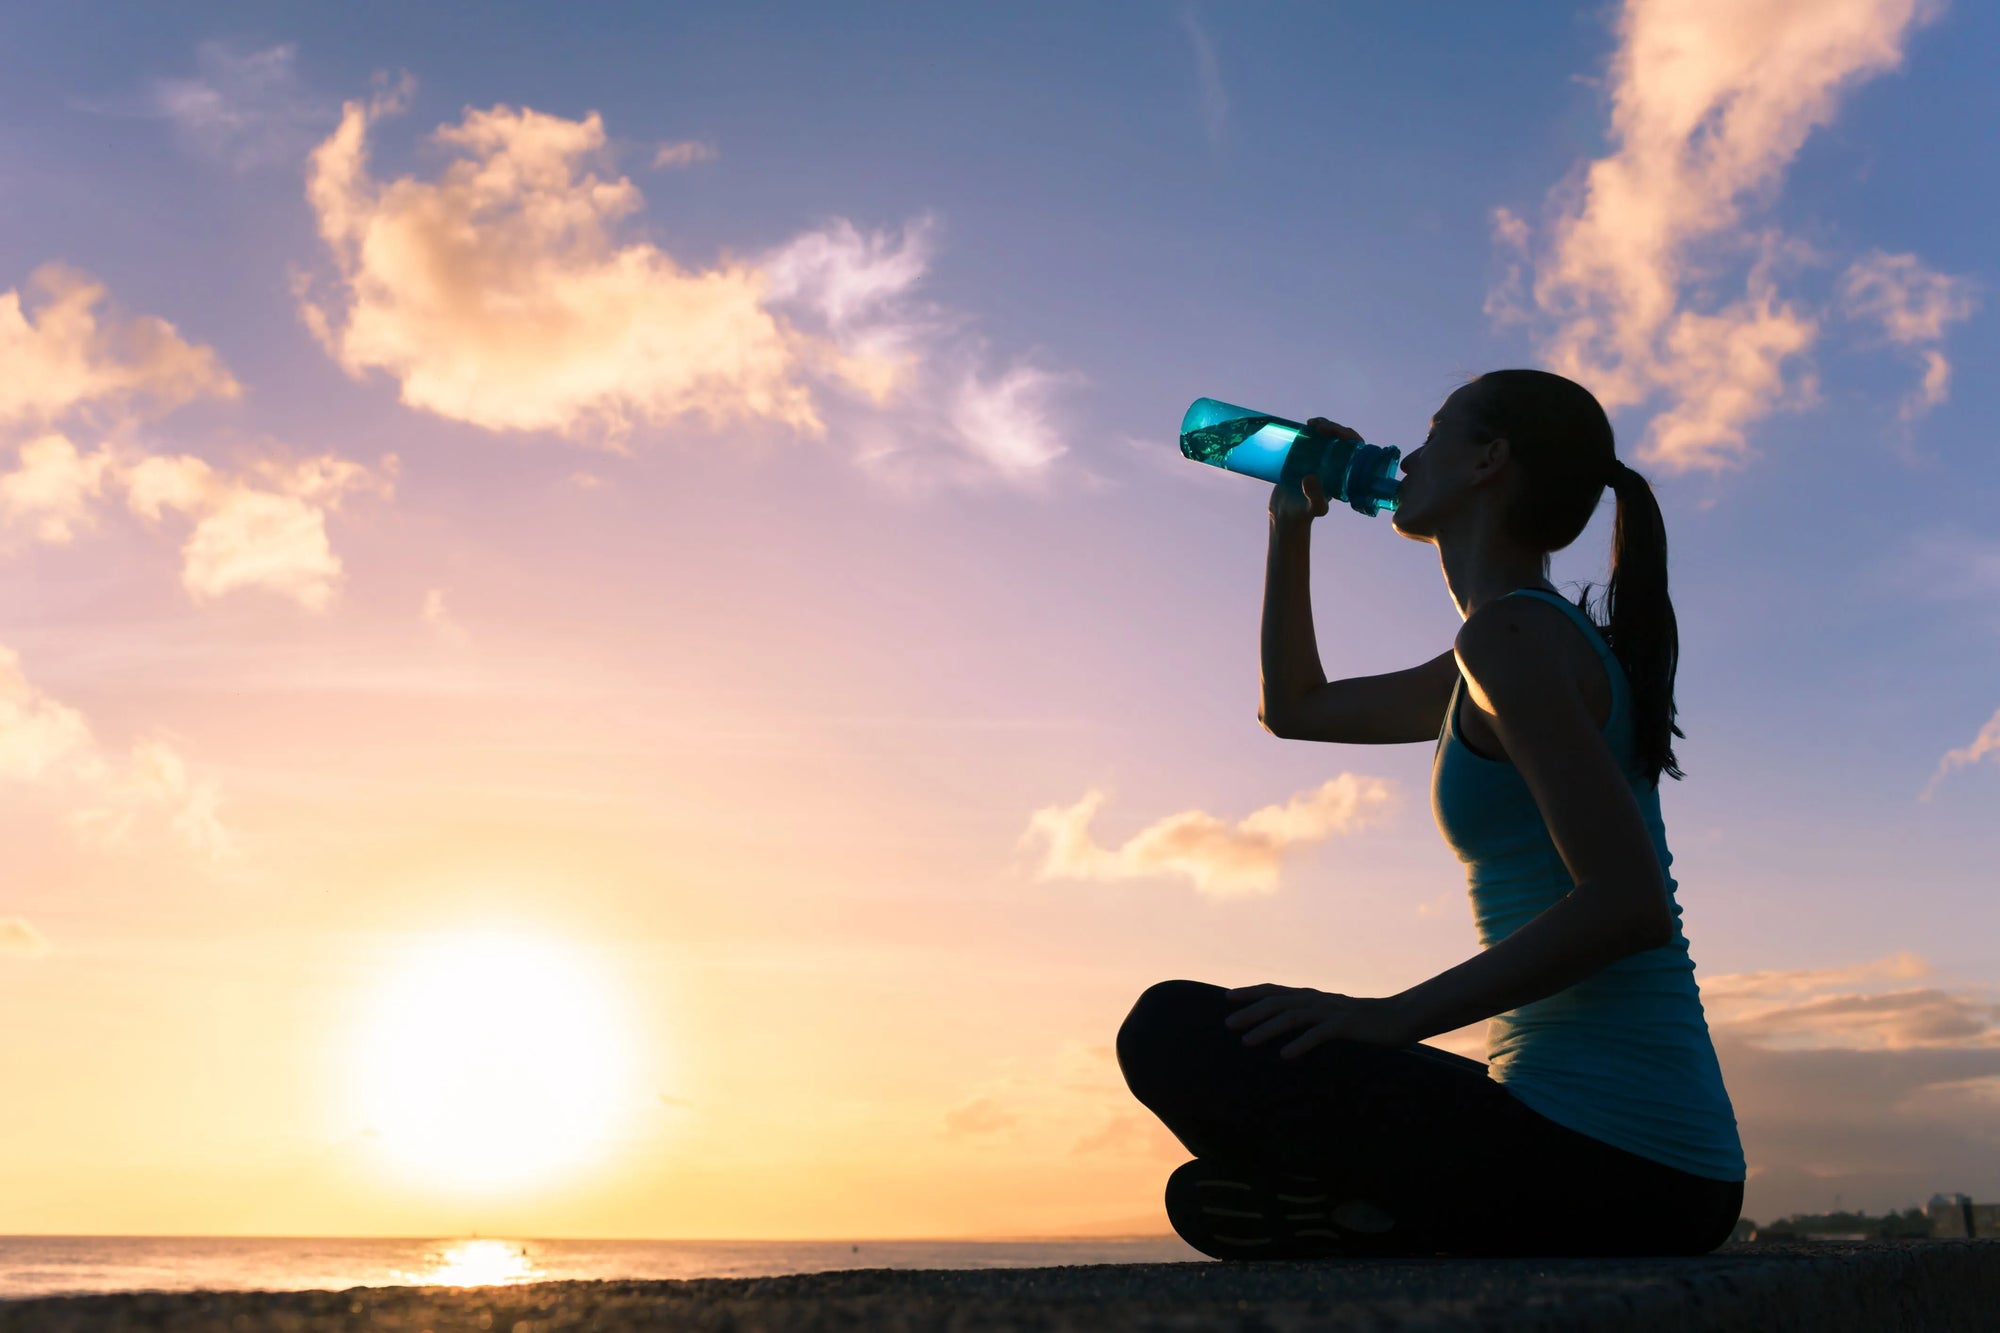 How Cost Effective is Hydrating with Electrolytes?